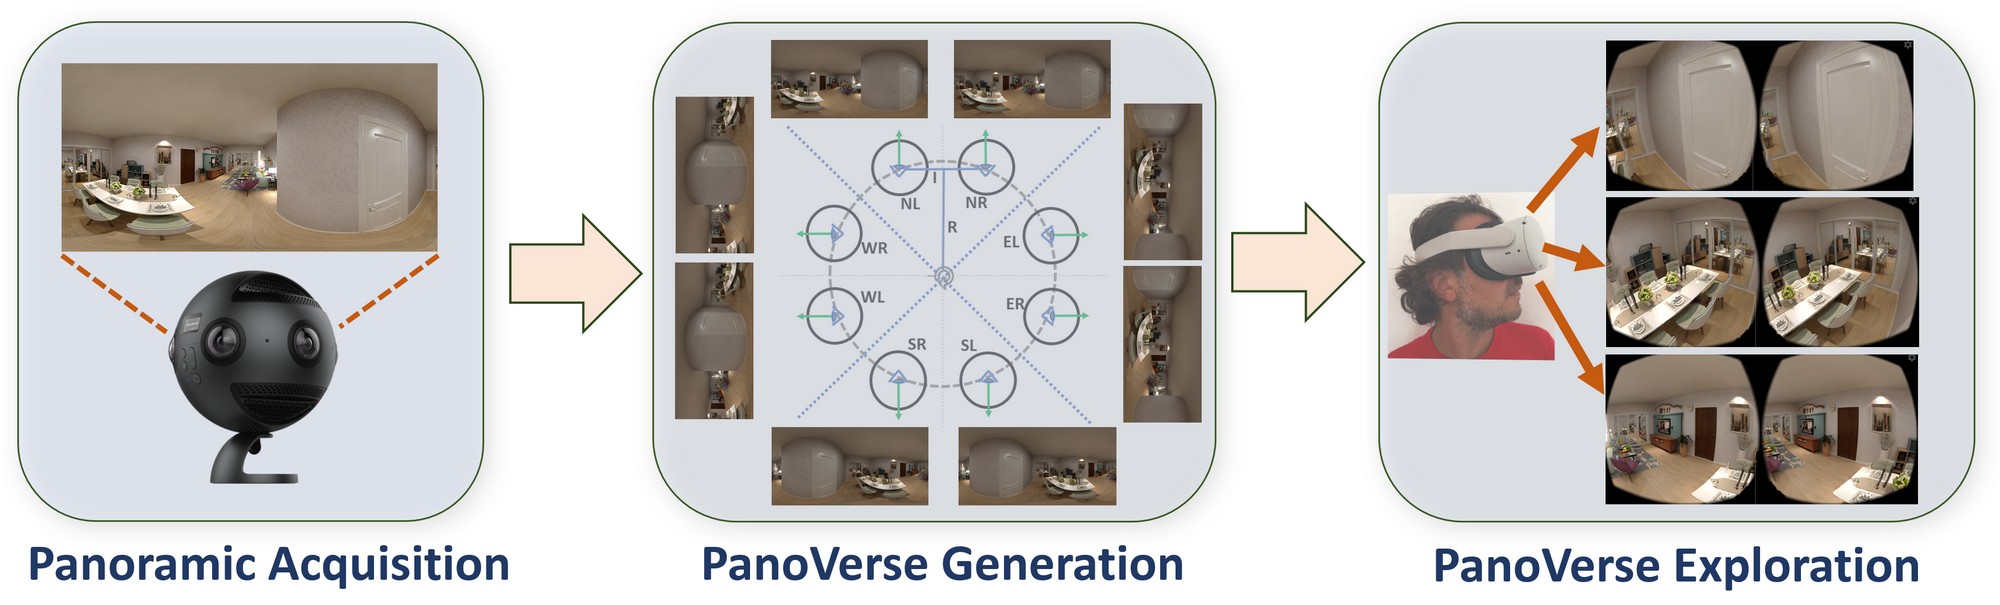 PanoVerse: automatic generation of stereoscopic environments from single indoor panoramic images for Metaverse applications
